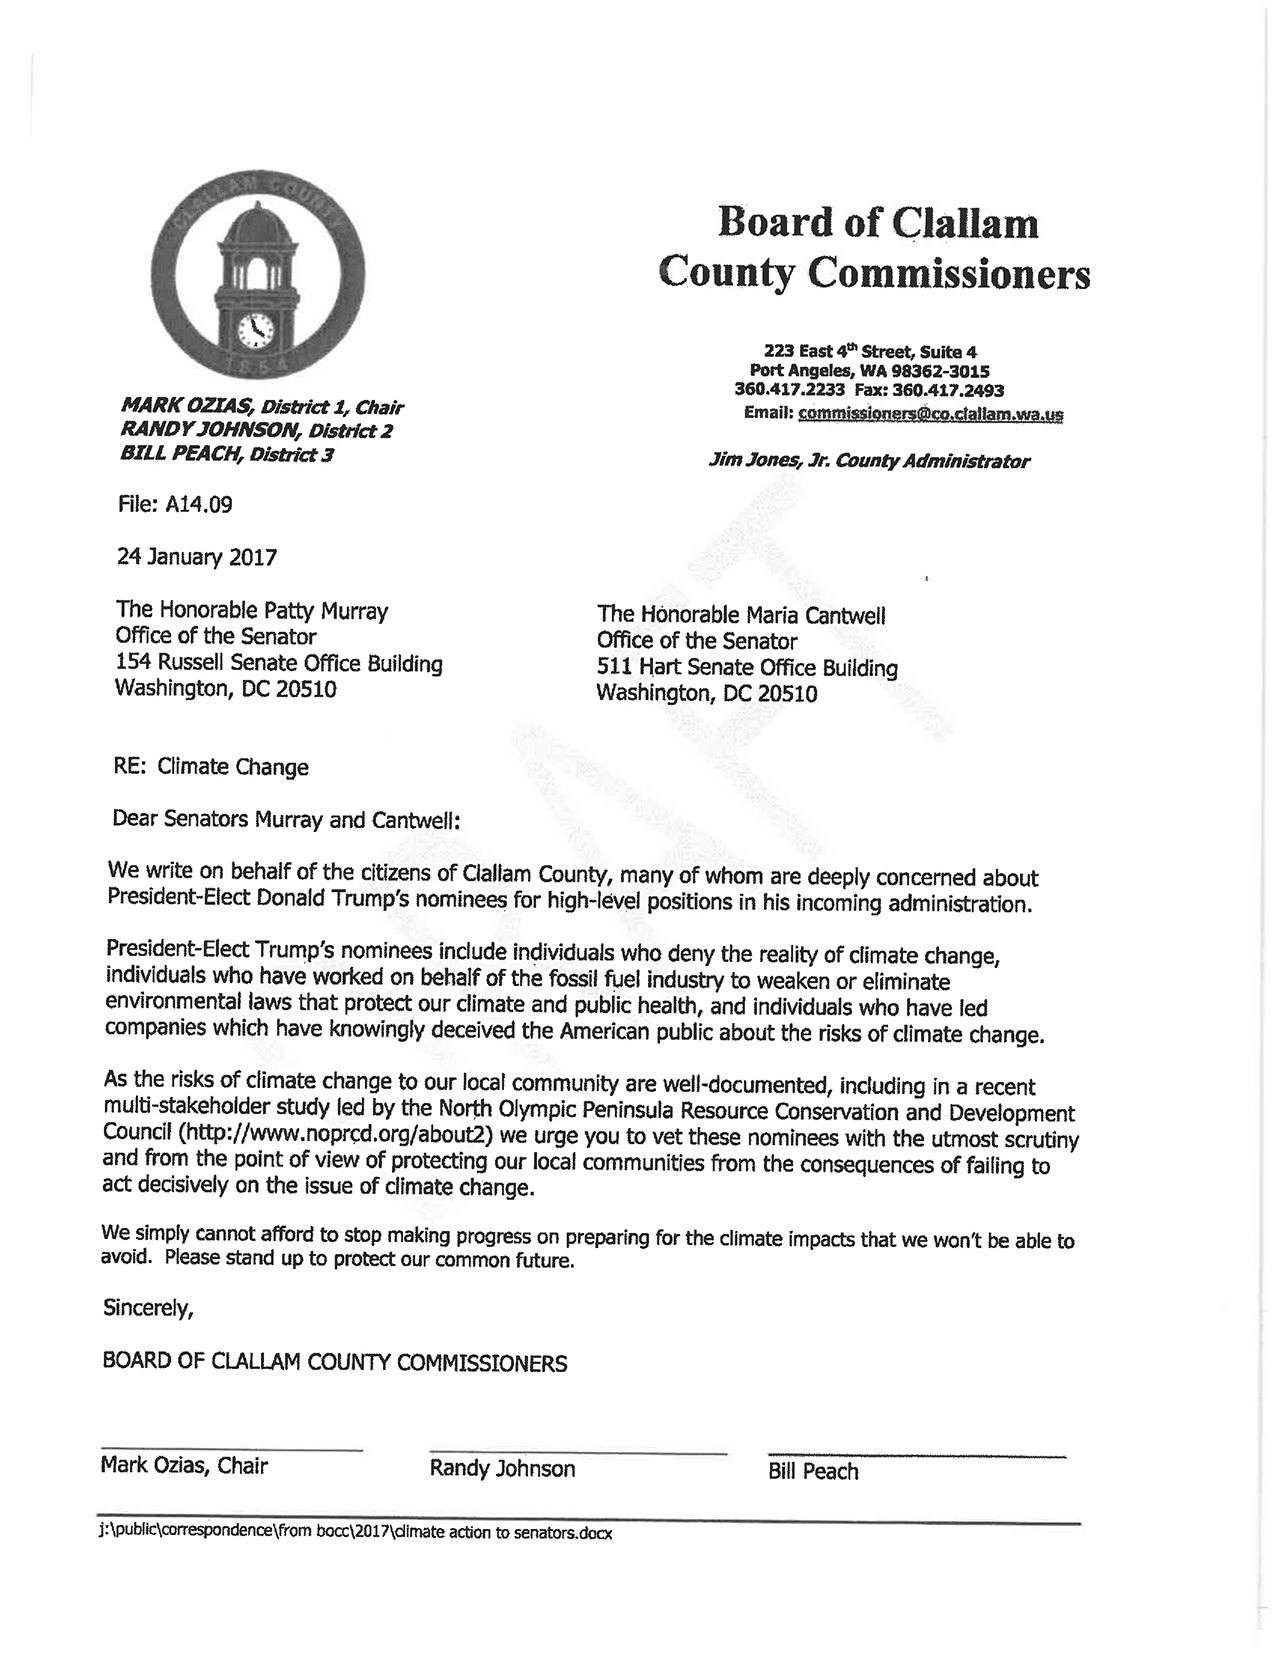 The letter drafted by Clallam County Commissioner Mark Ozias.